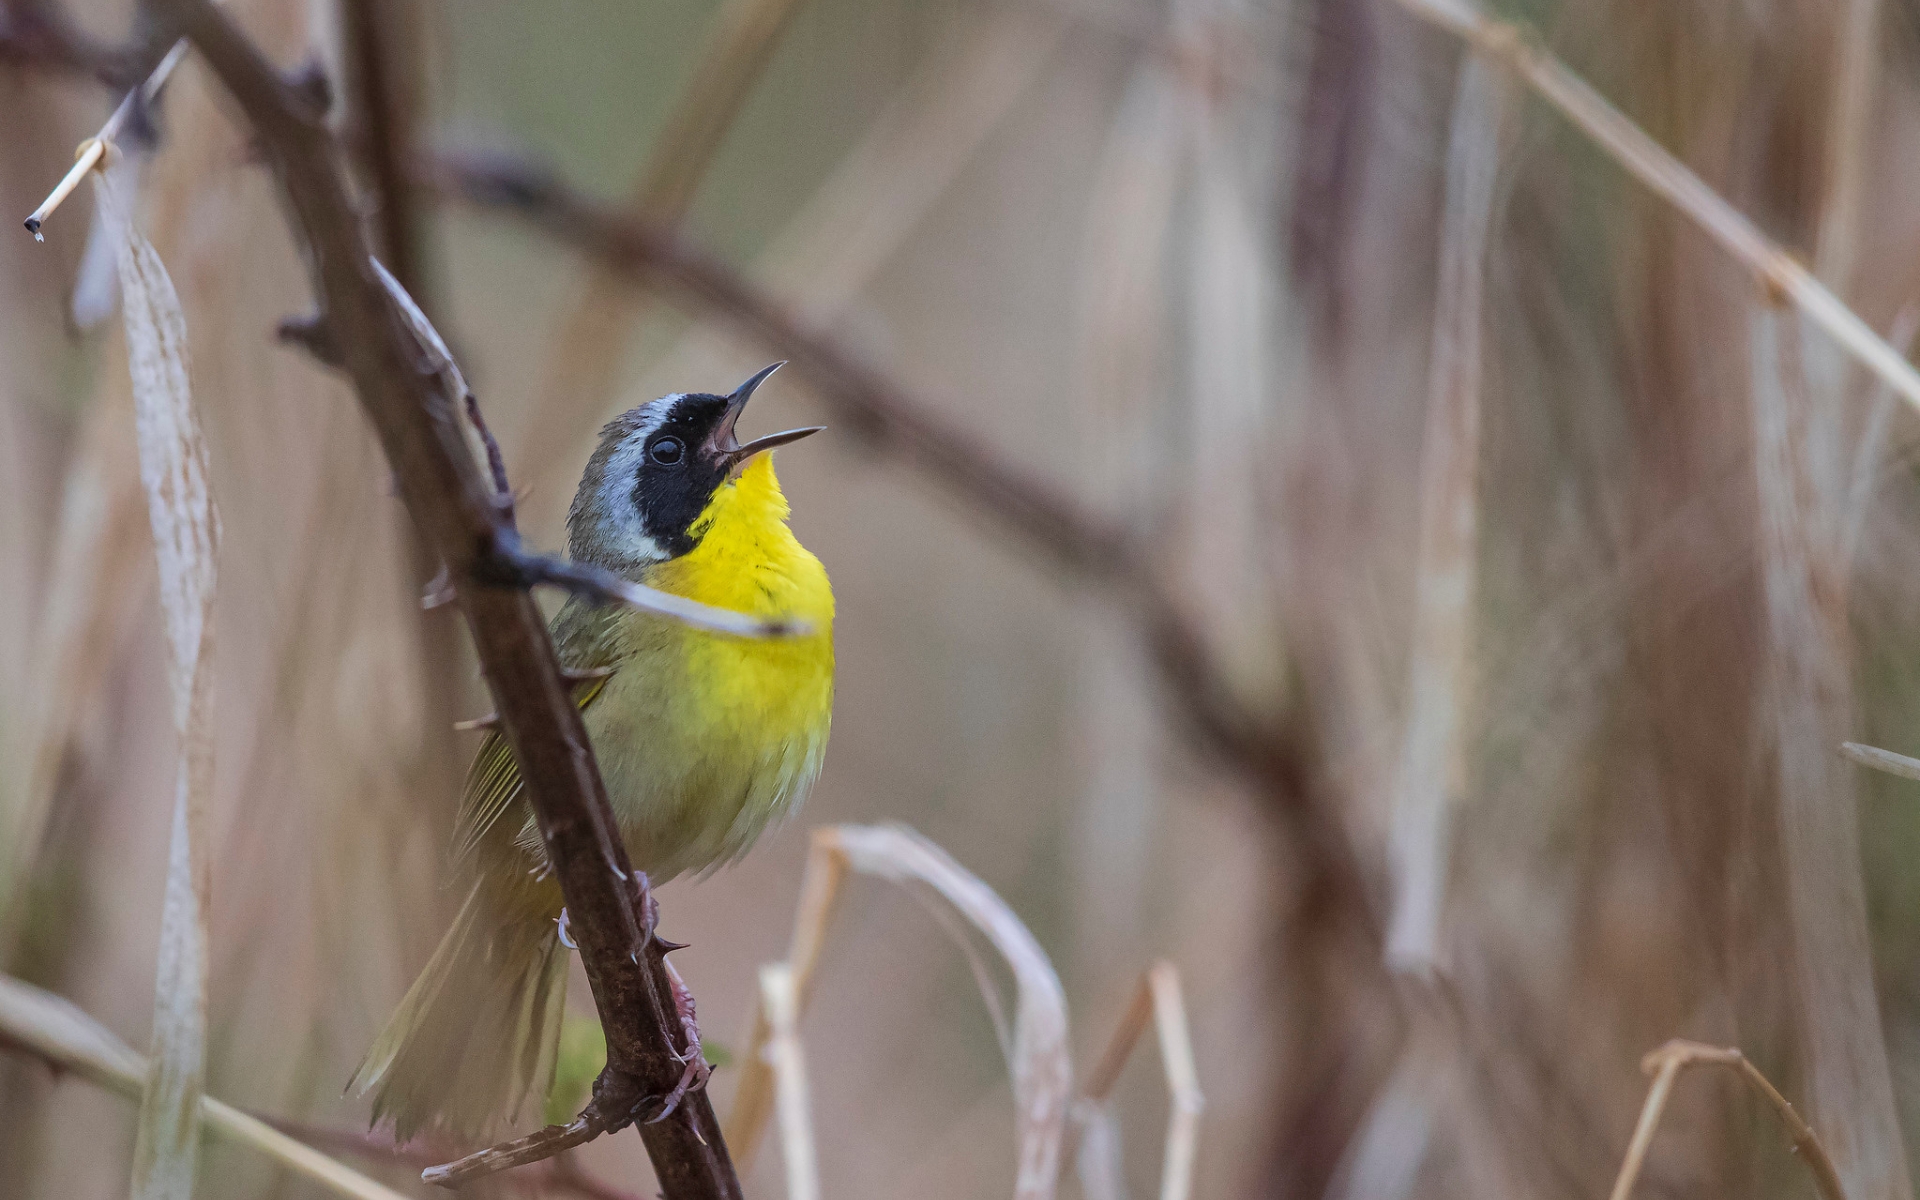 A singing common yellowthroat grips a thorny branch.